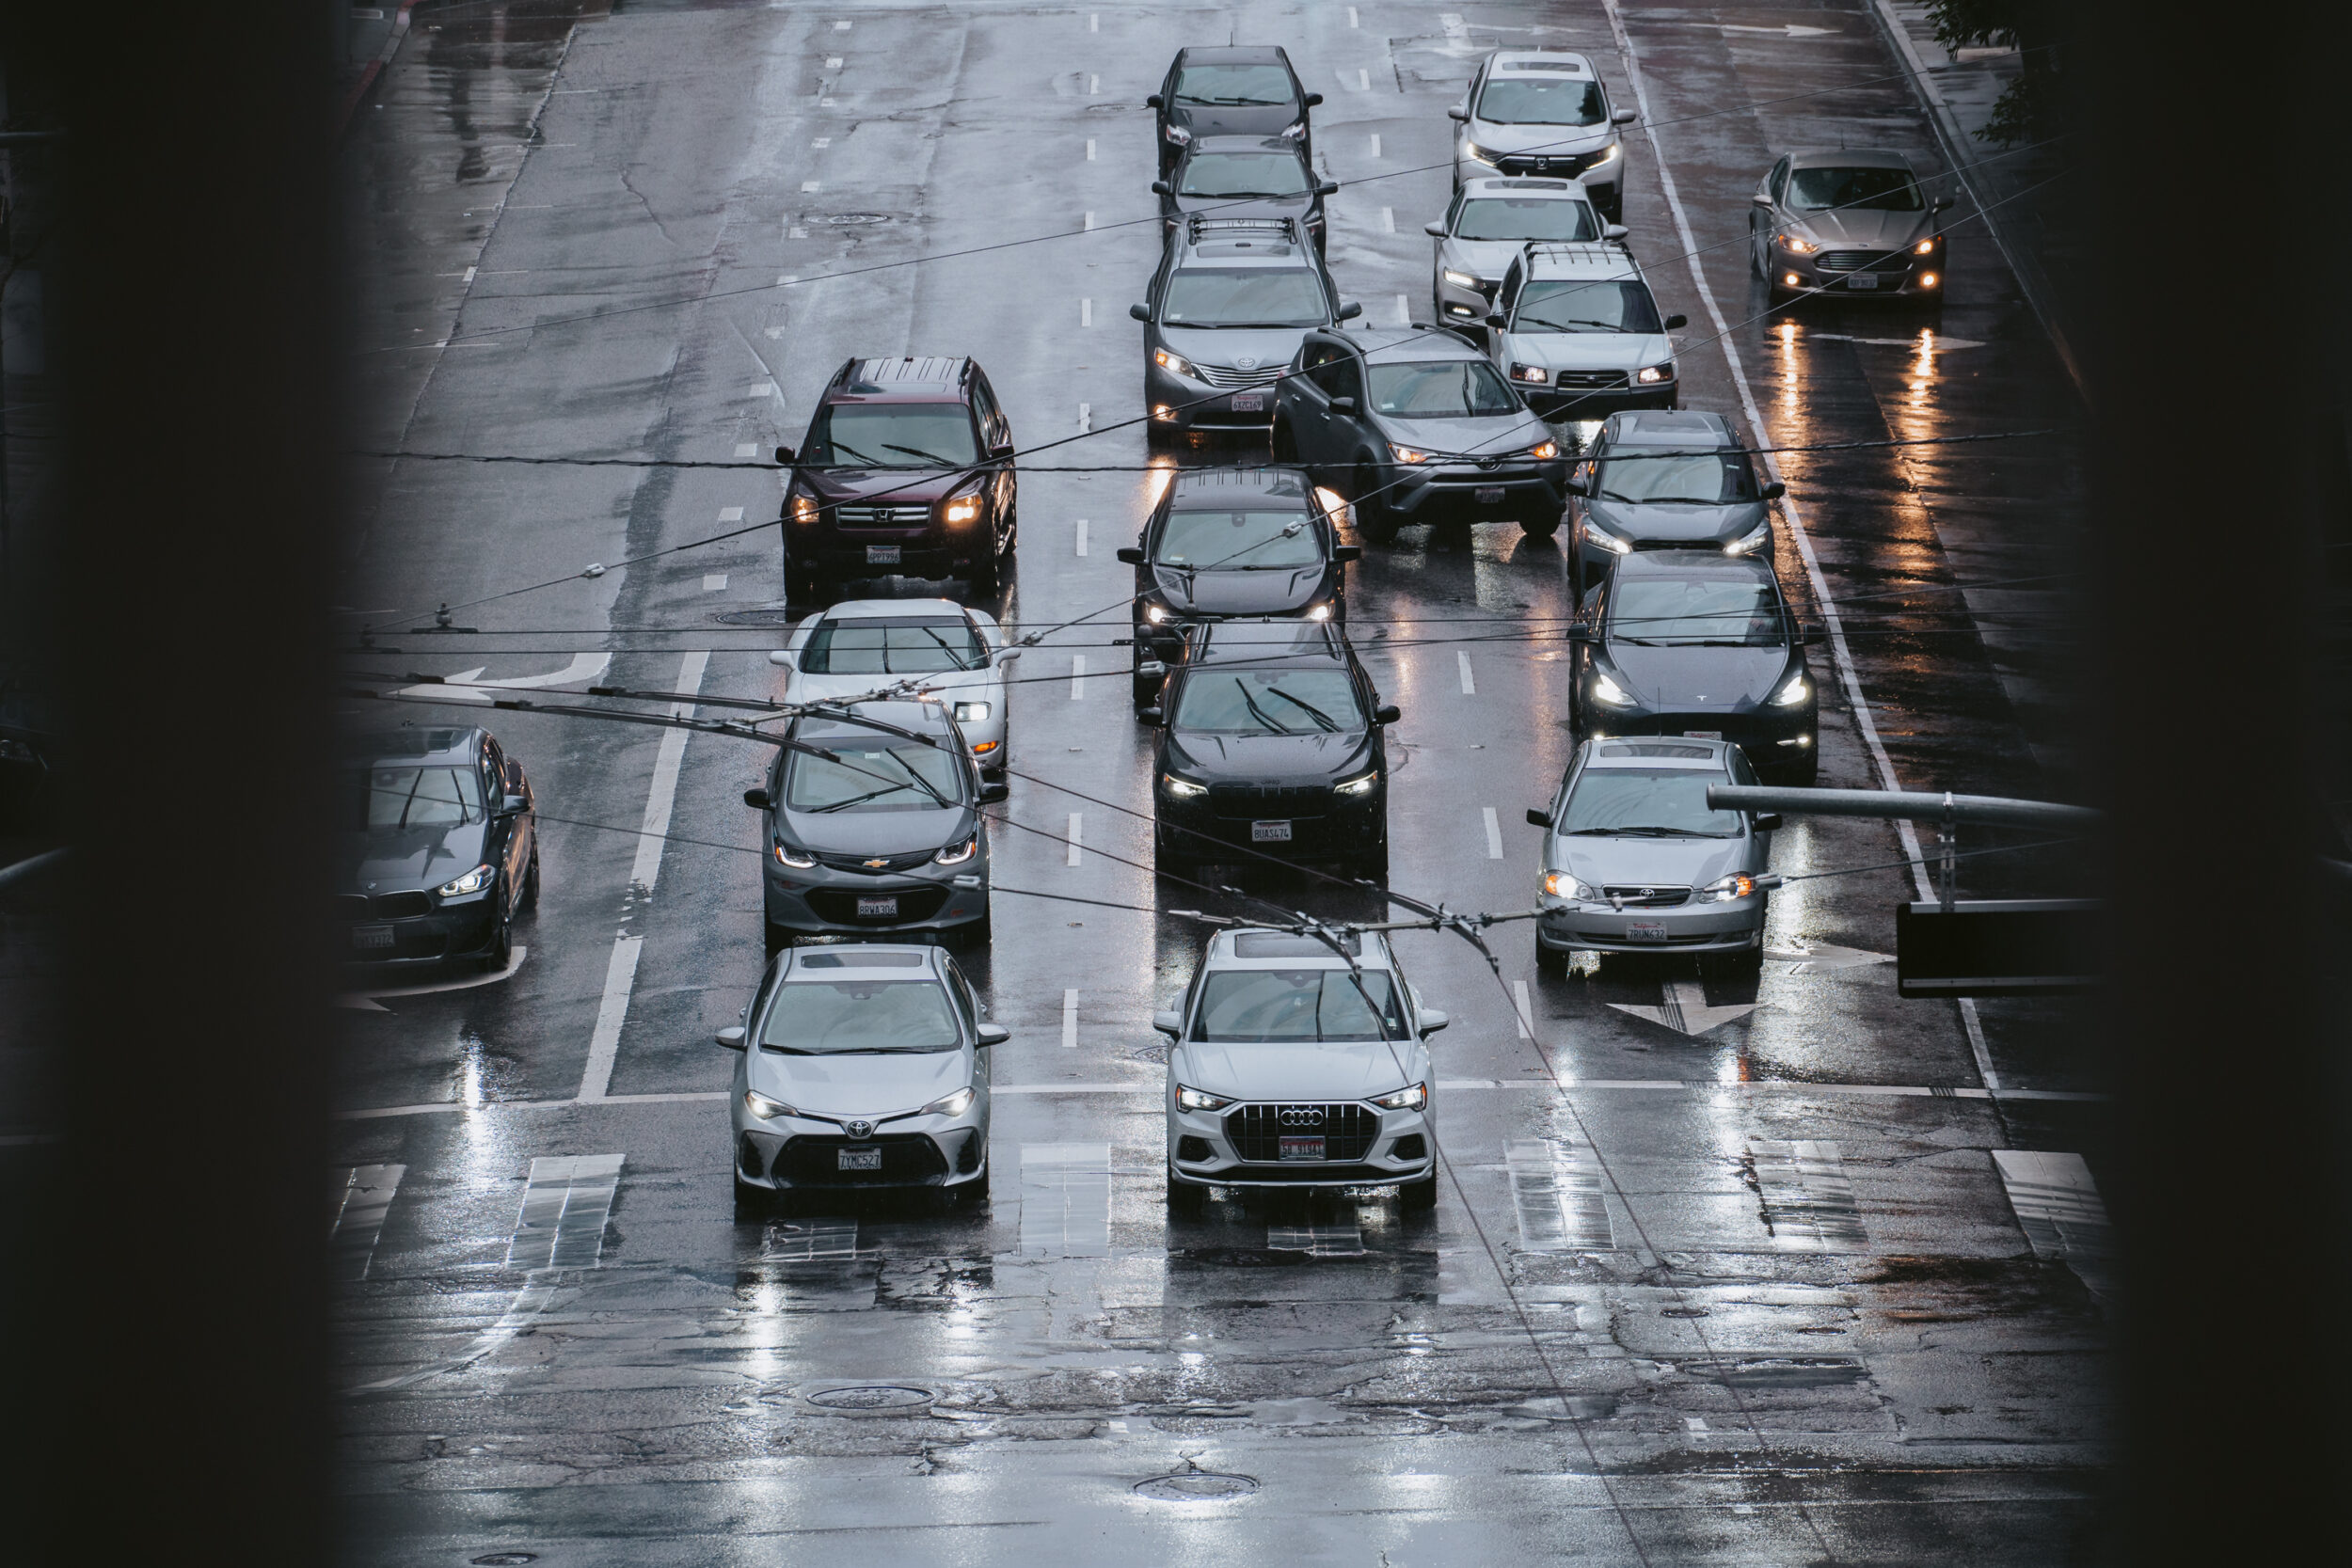 Cars on a road wet by rain